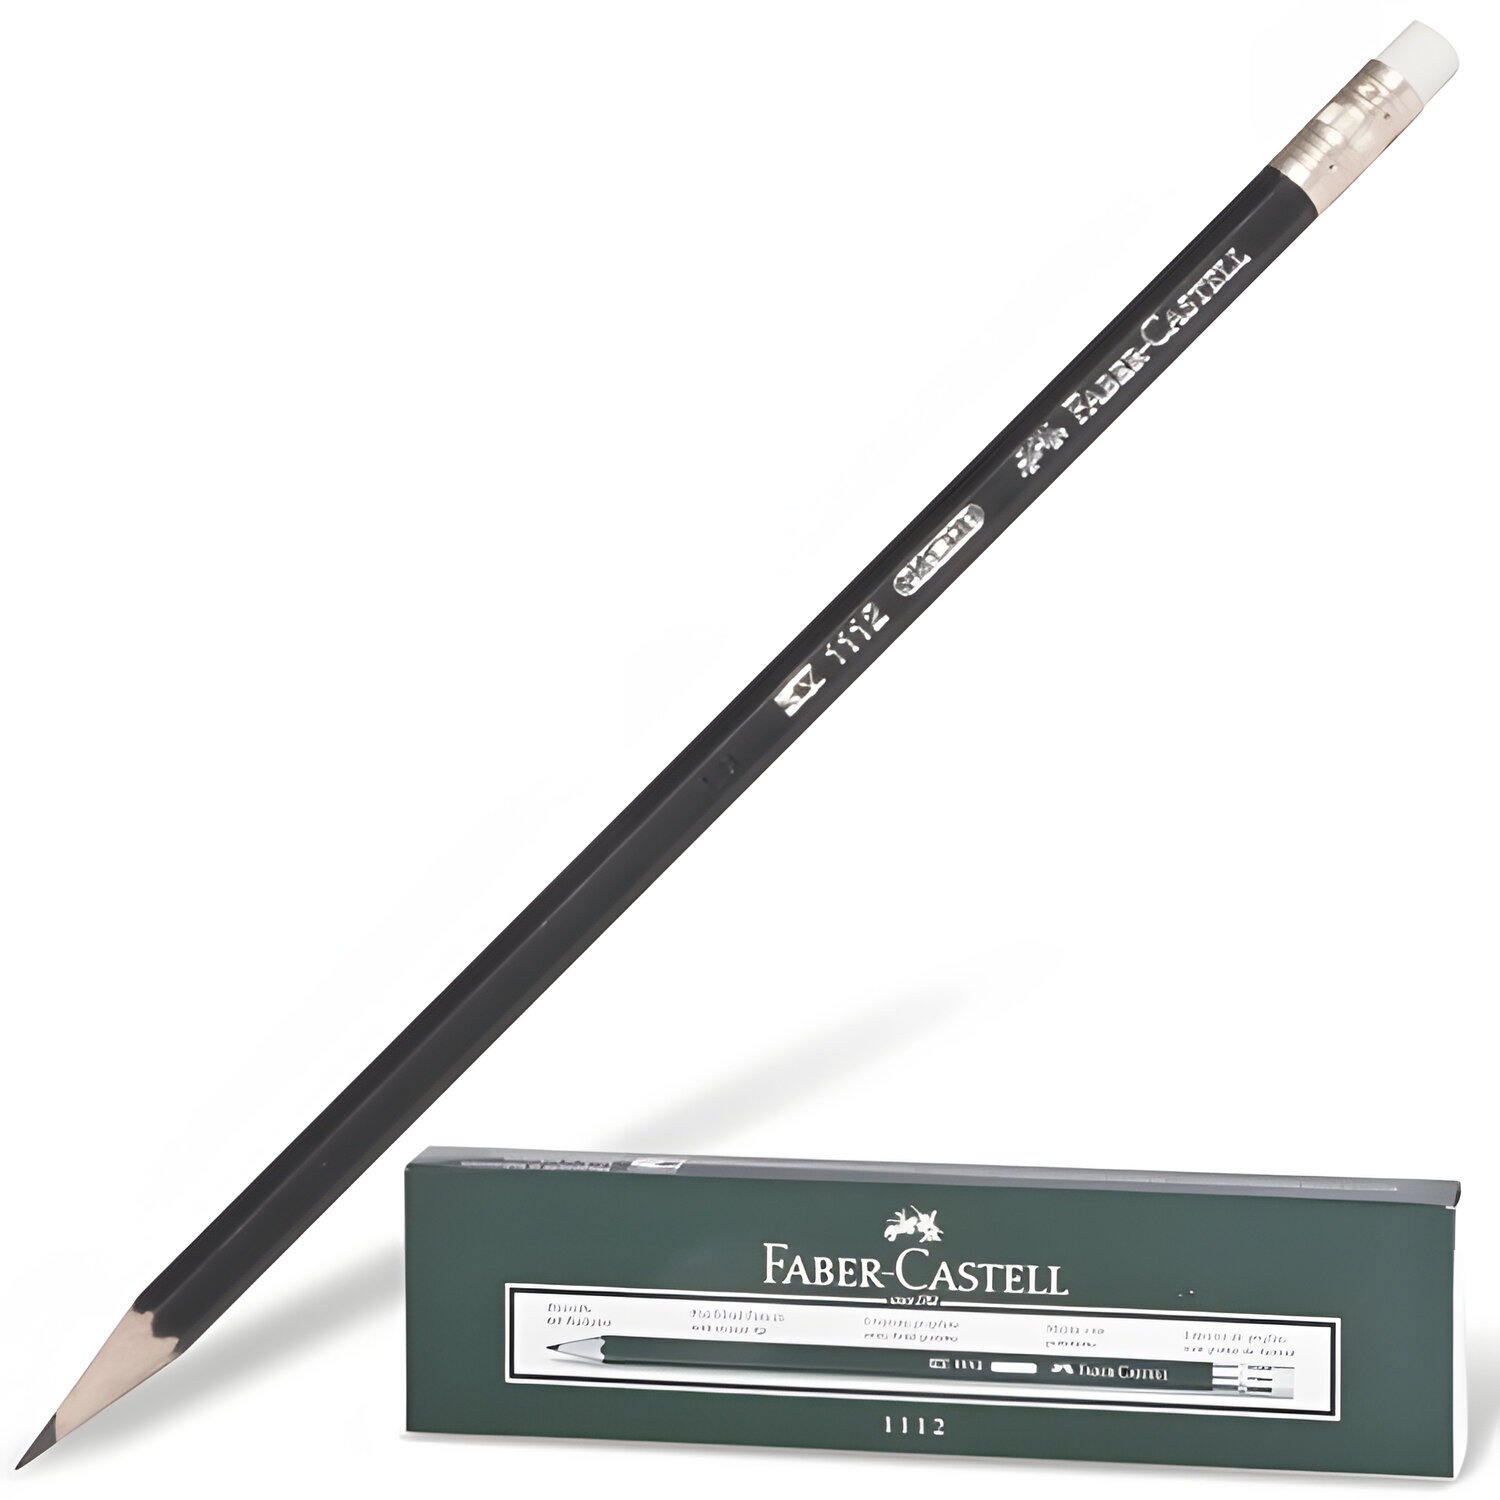 Faber-castell  FABER-CASTELL 111200,  36 .